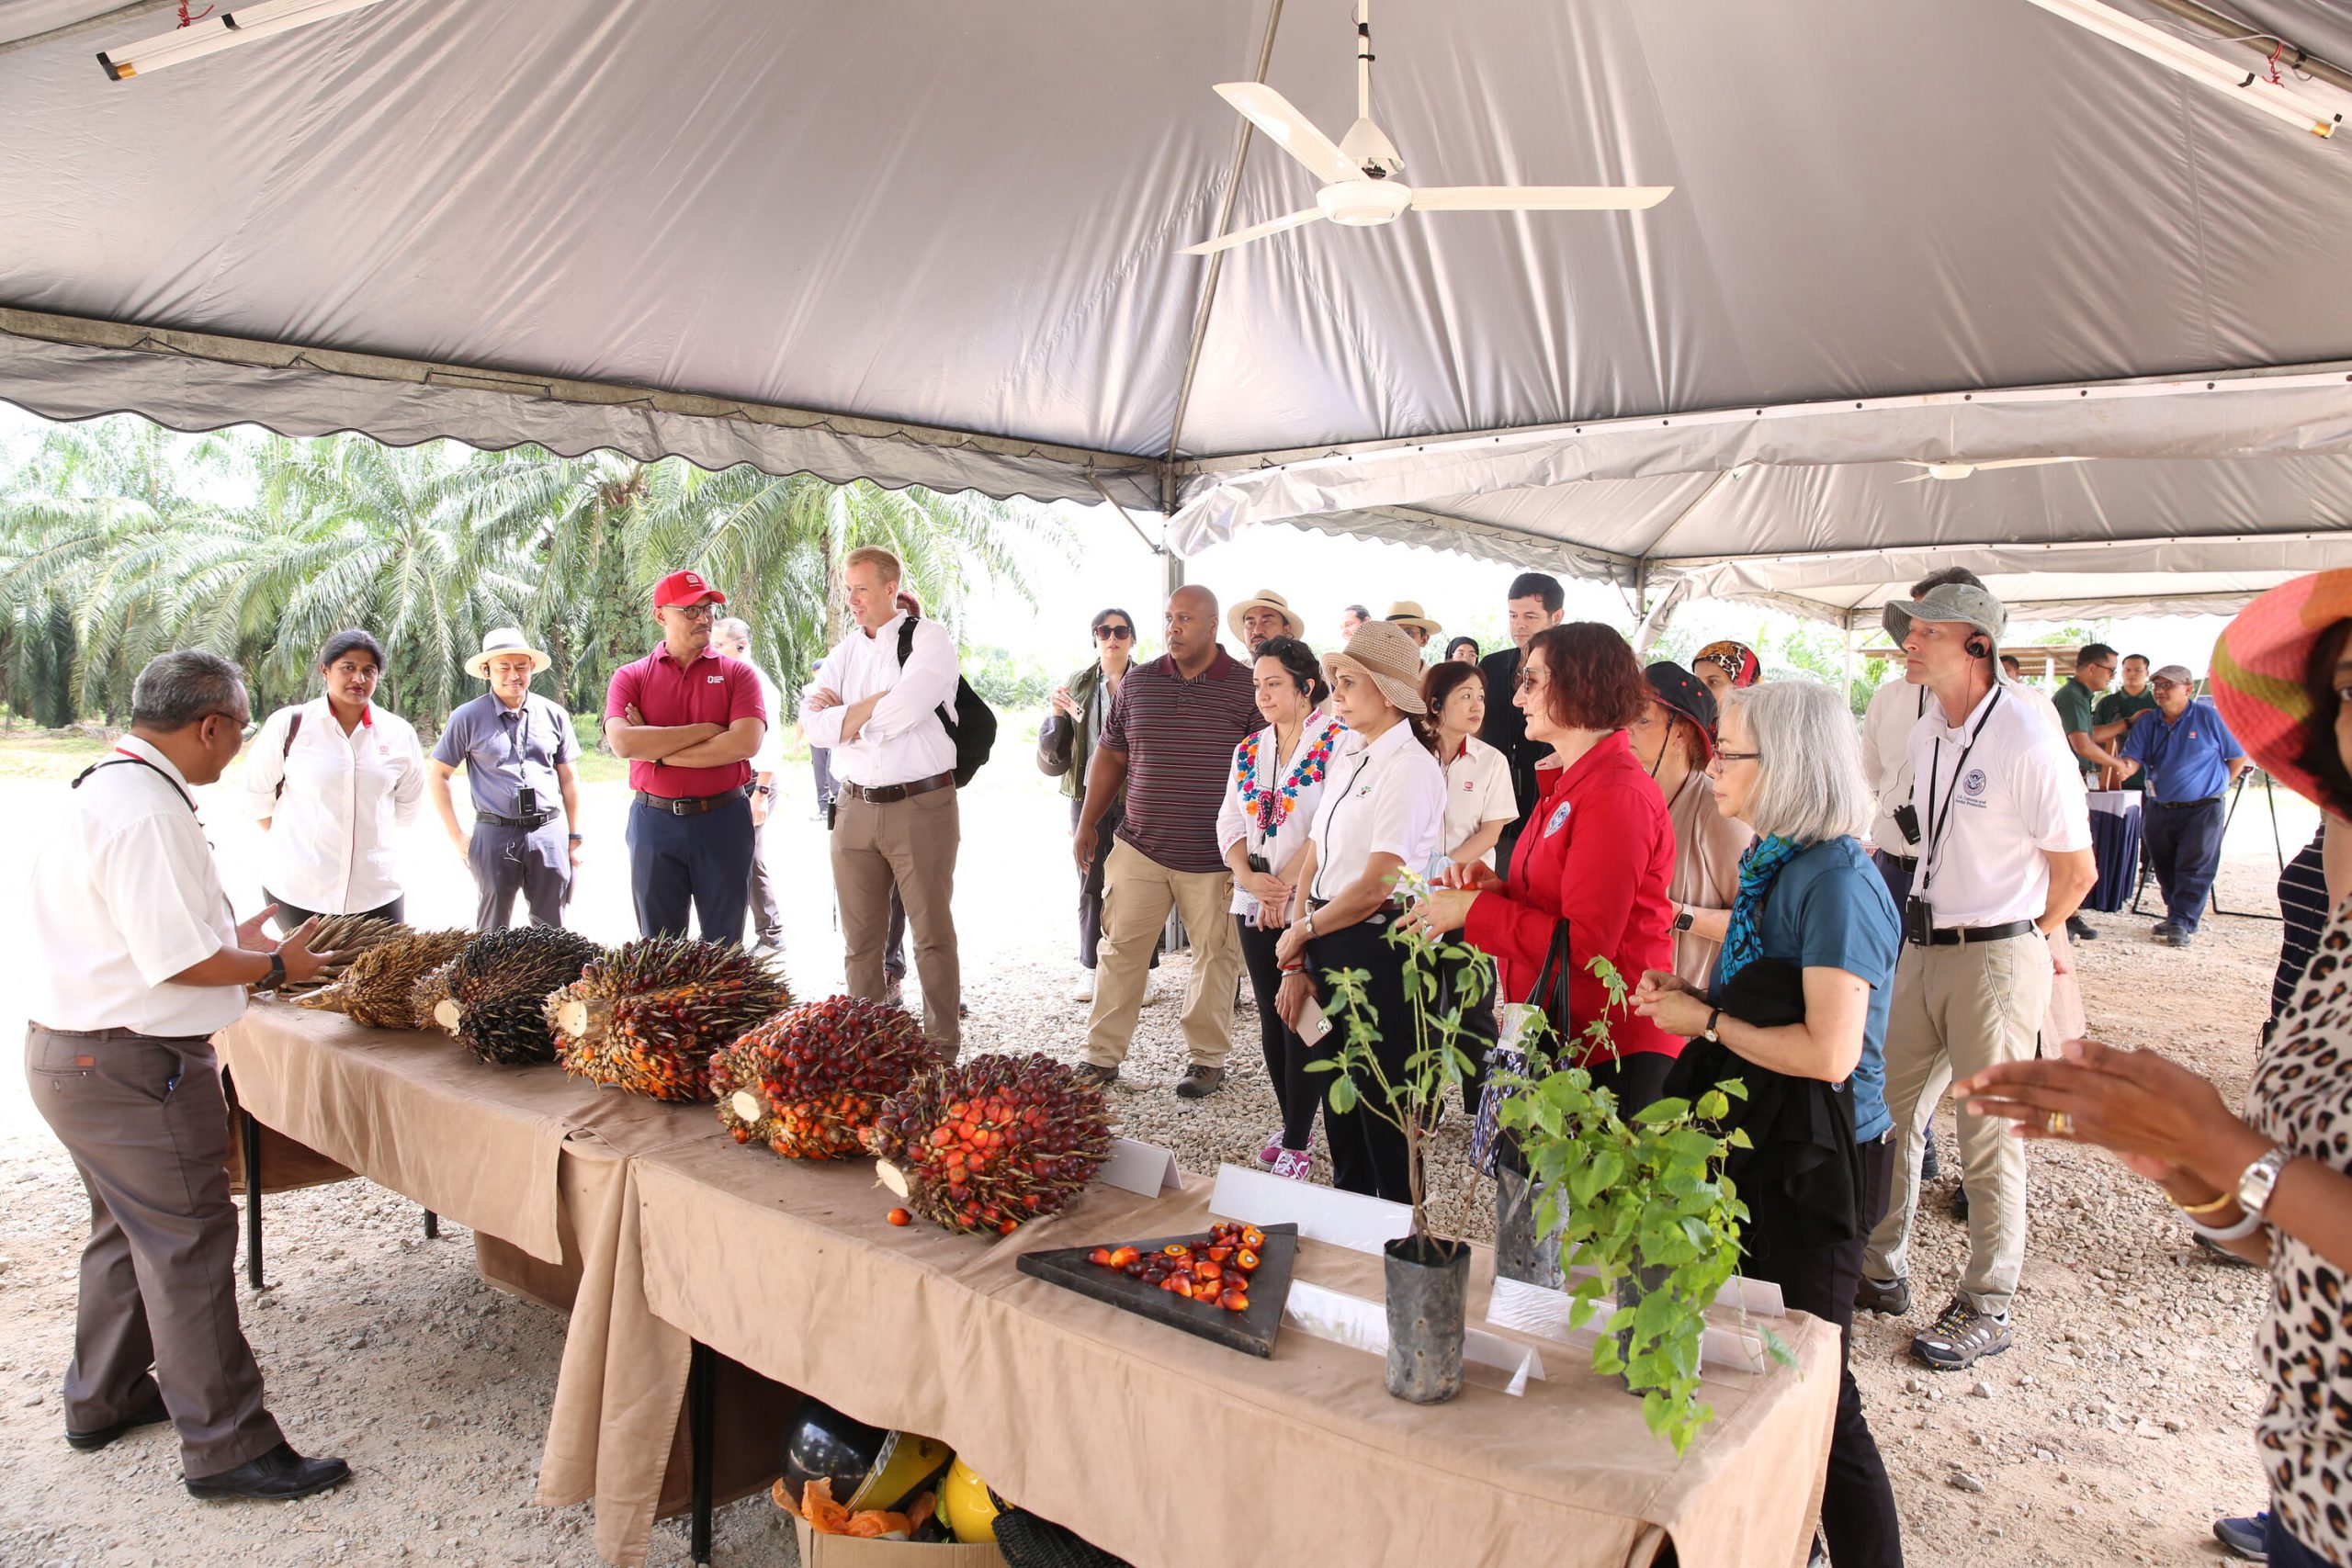 Sime Darby Plantation welcomed US delegation to Carey Island operations